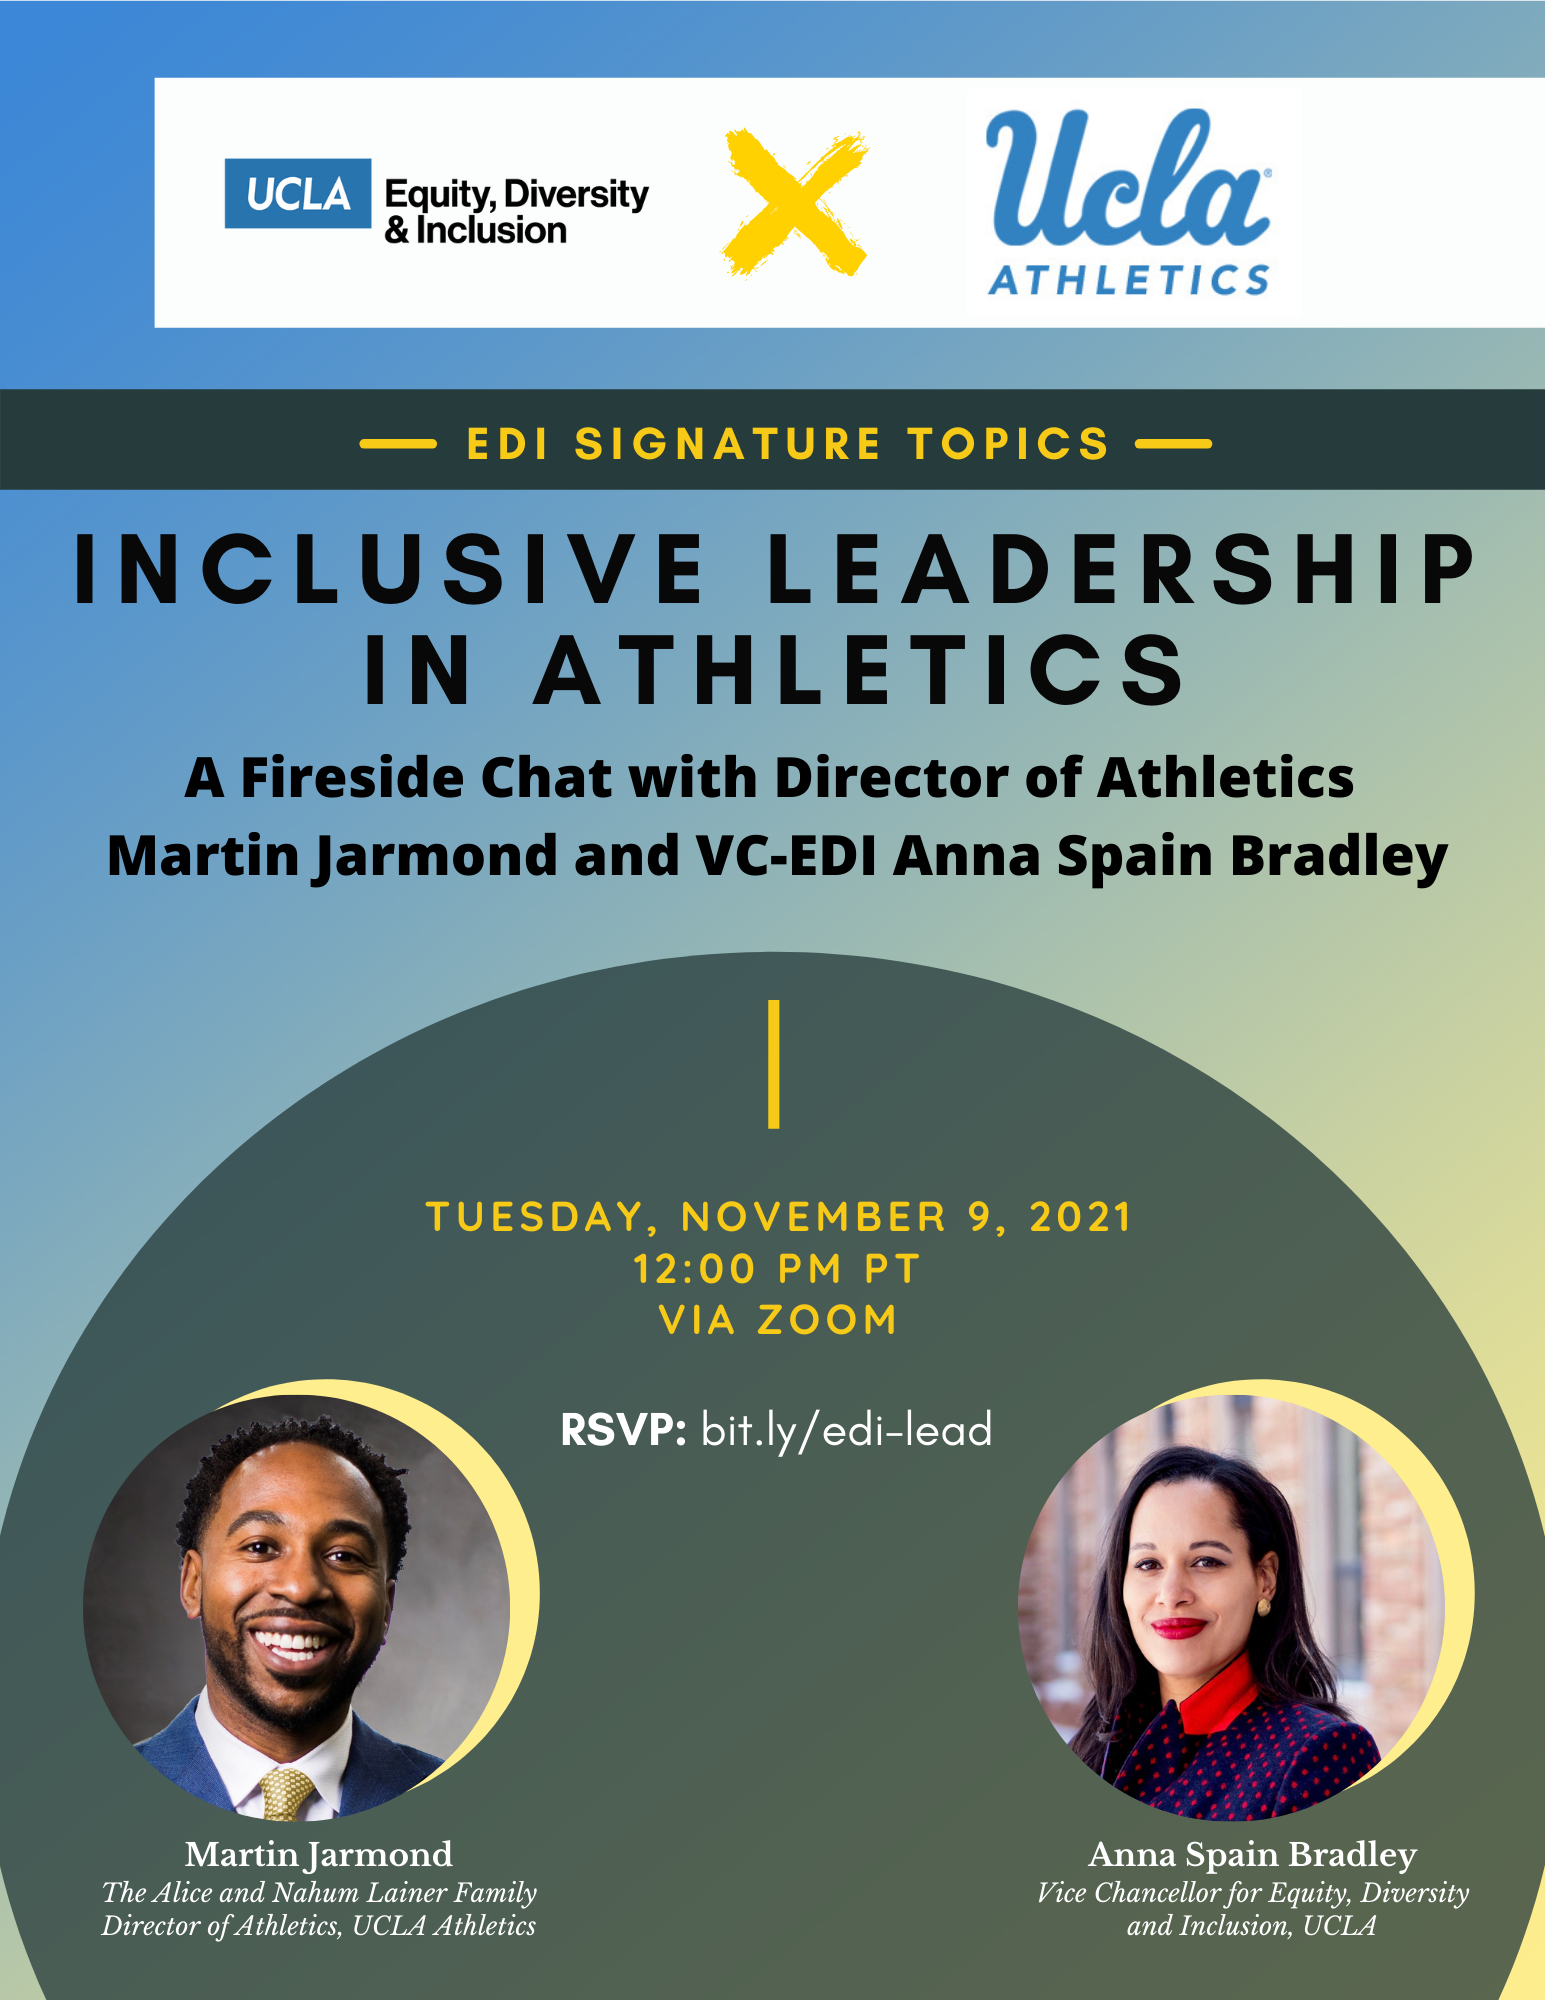 flyer for edi signature topcis - inclusive leadership in sports: a fireside chat with director of athletics martin jarmond and vc-edi anna spain bradley